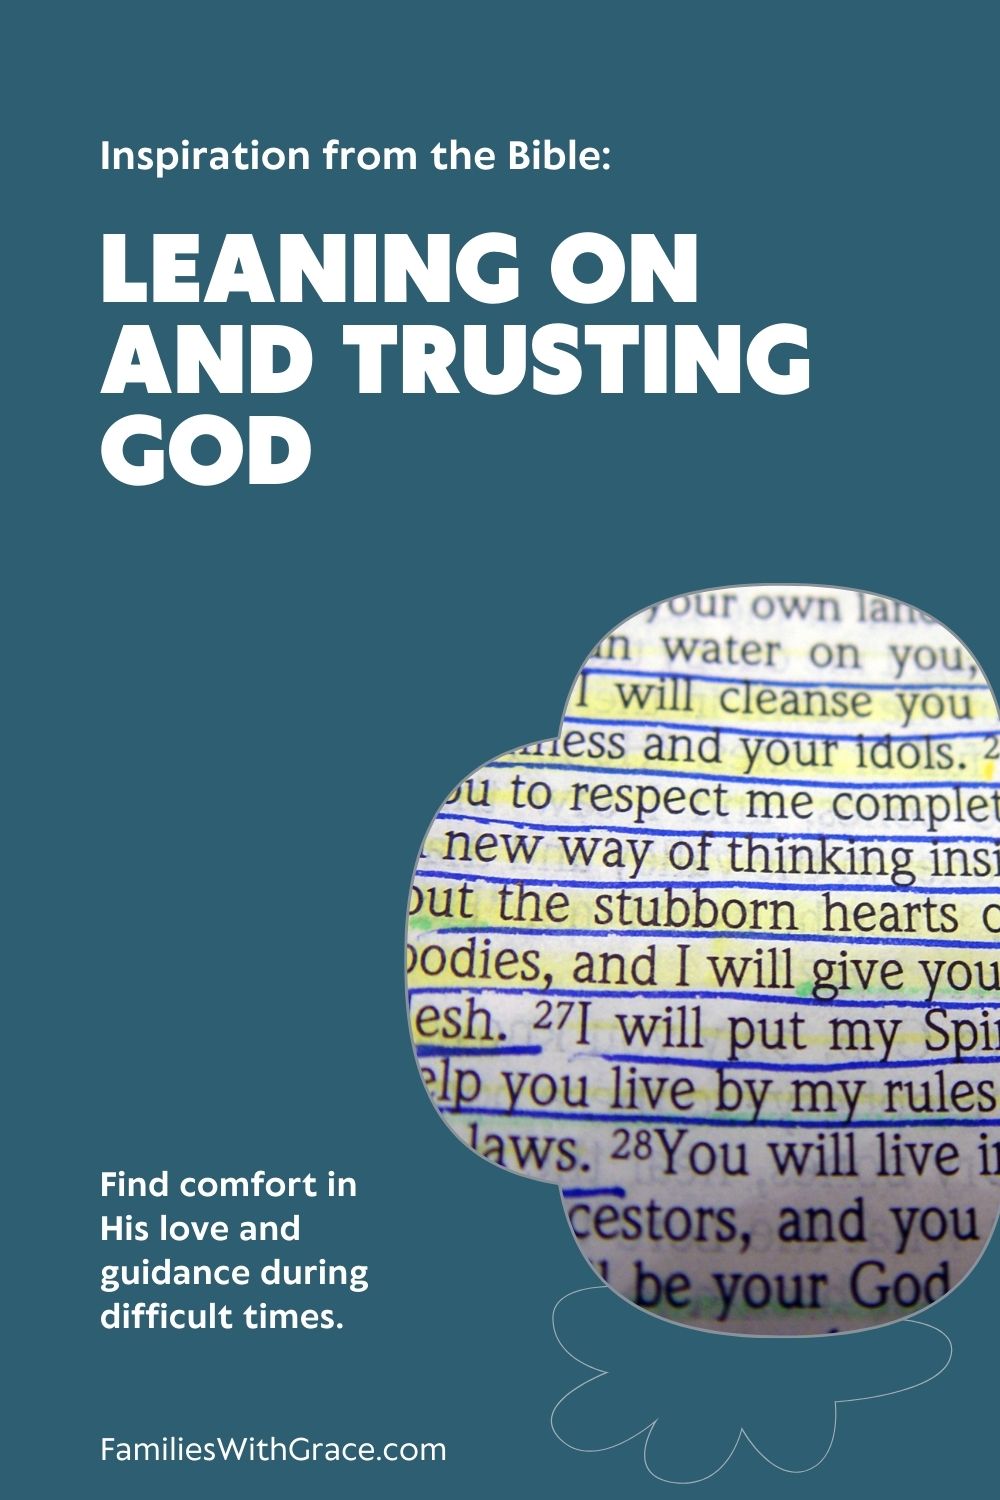 Bible verses about leaning on and trusting God